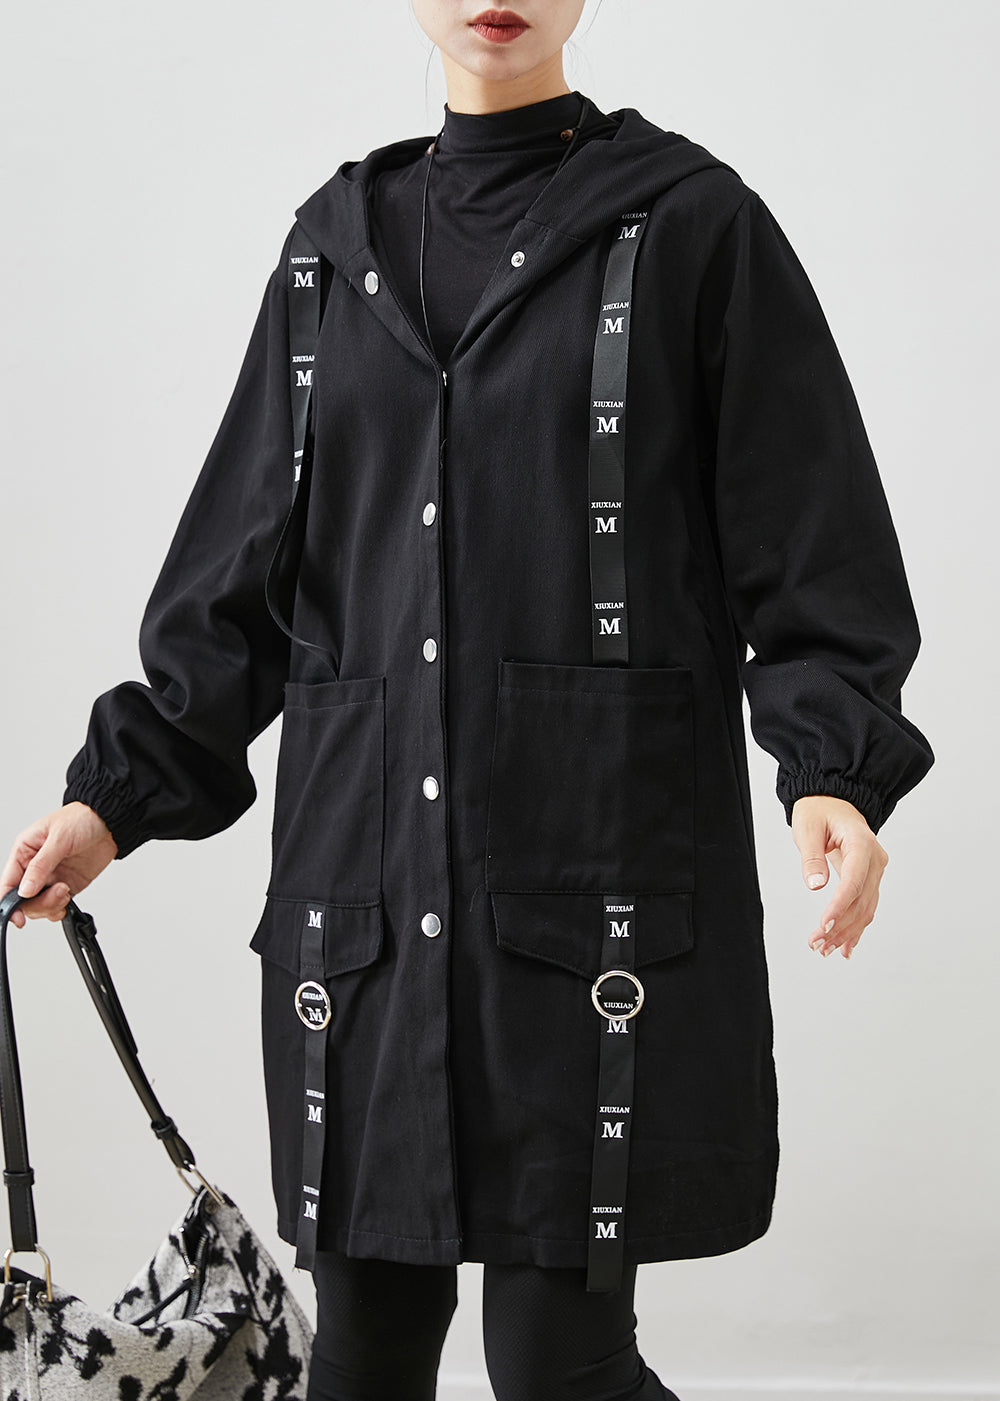 Black Patchwork Cotton Hoodie Trench Coat Oversized Fall